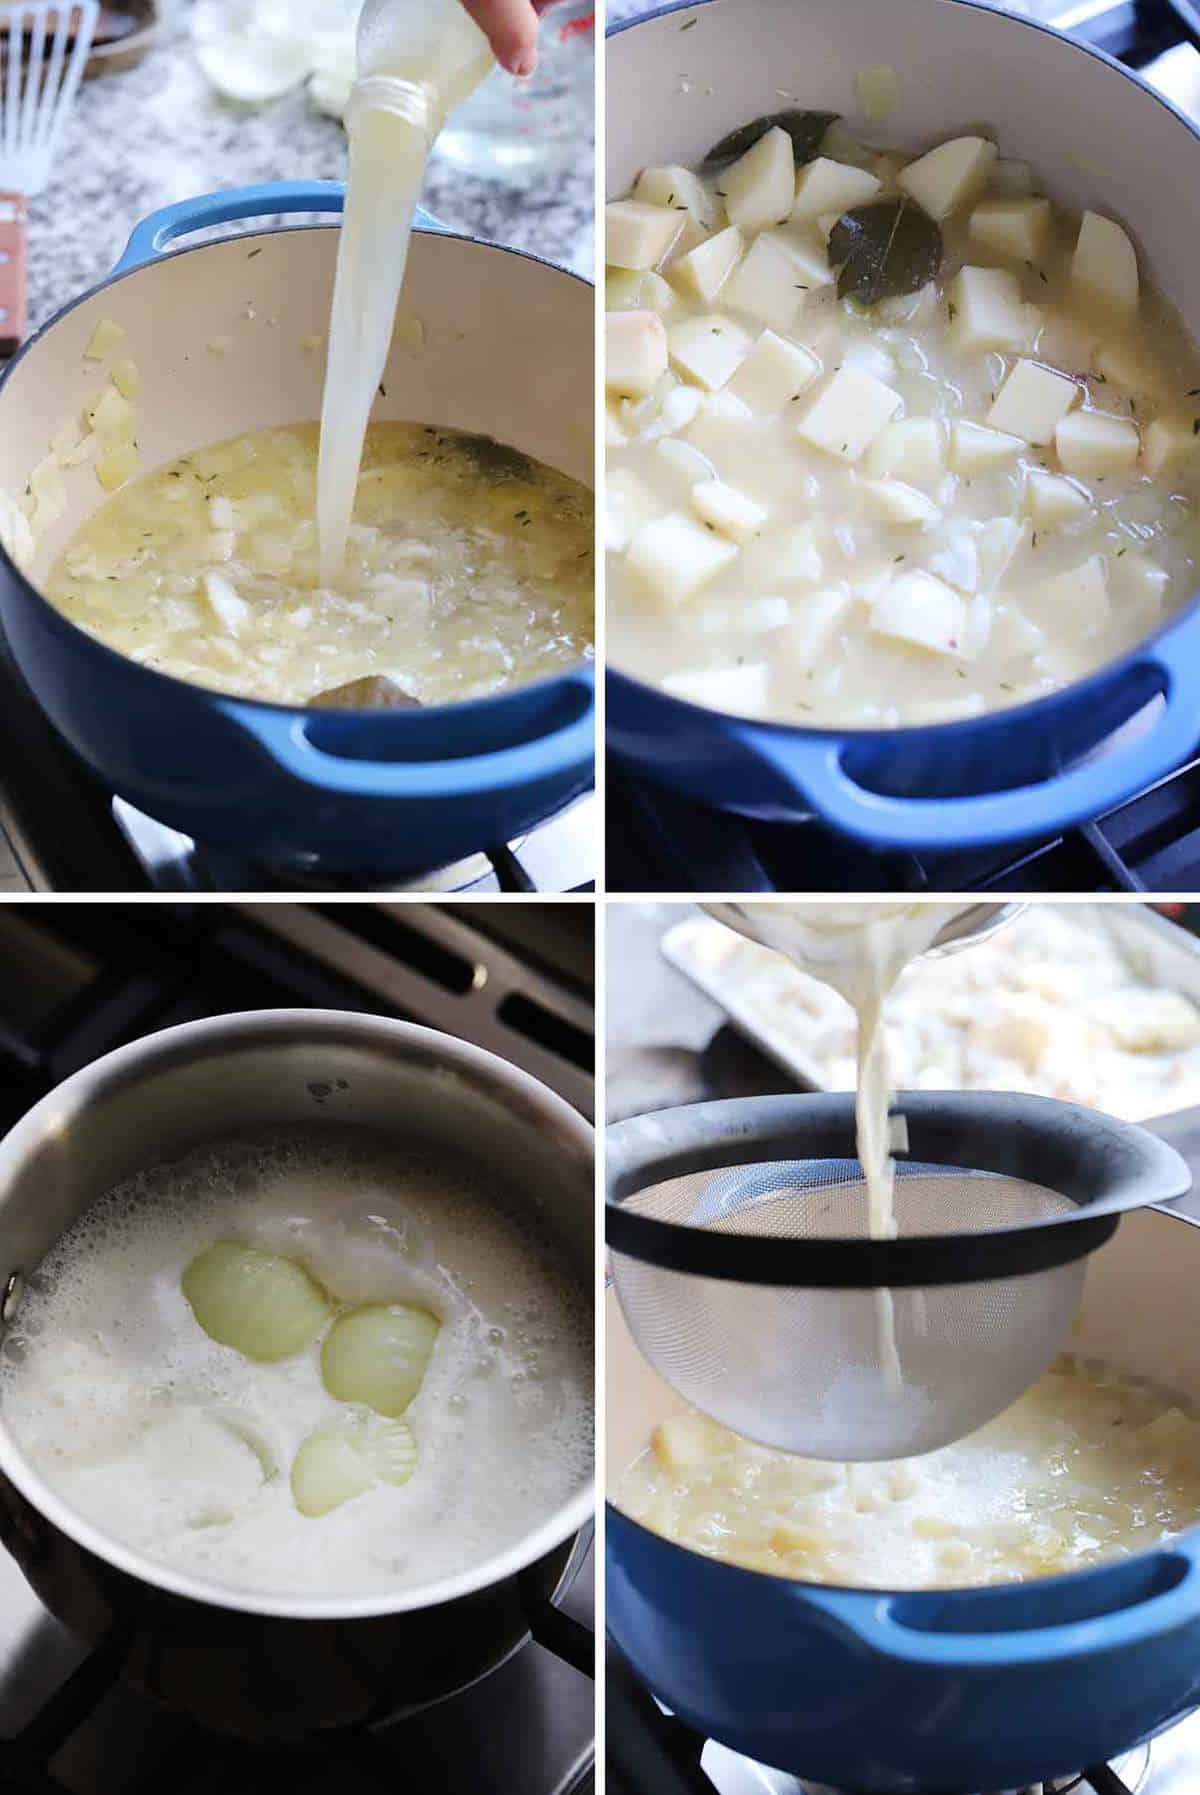 Process collage showing adding clam juice, potatoes, and scalded milk to fish chowder.